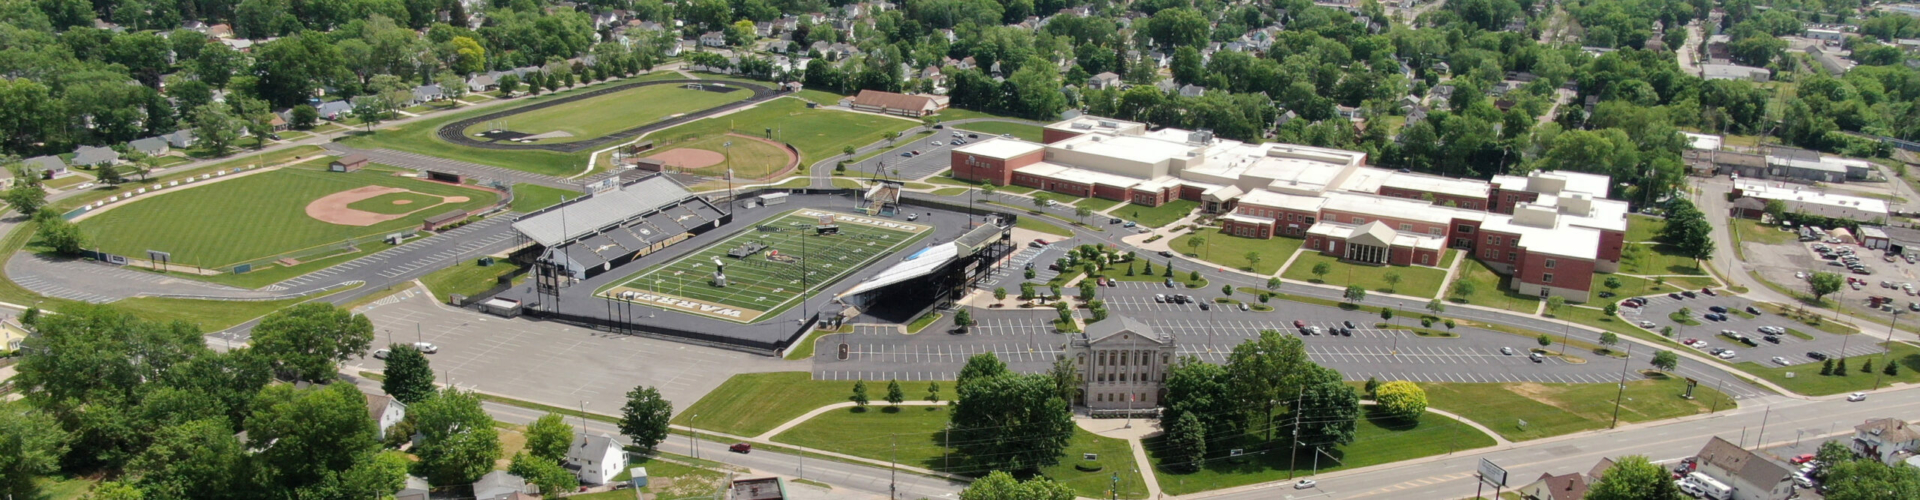 Warren G. Harding High School campus as seen from above in May 2021